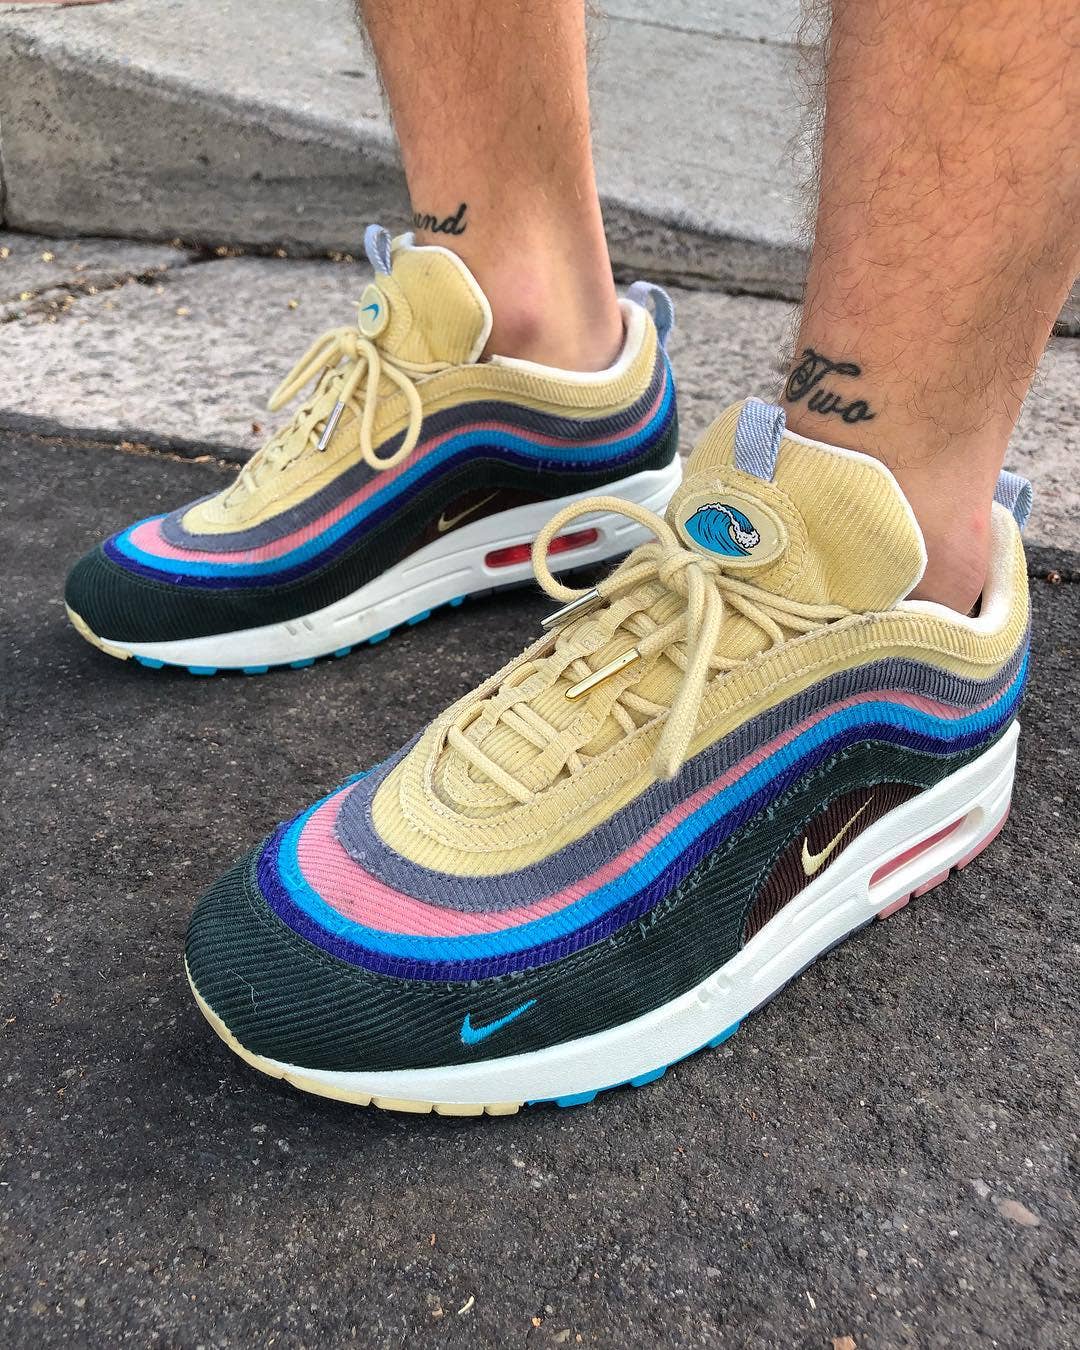 Sean Wotherspoon's Nike Air Max Is Early | Complex